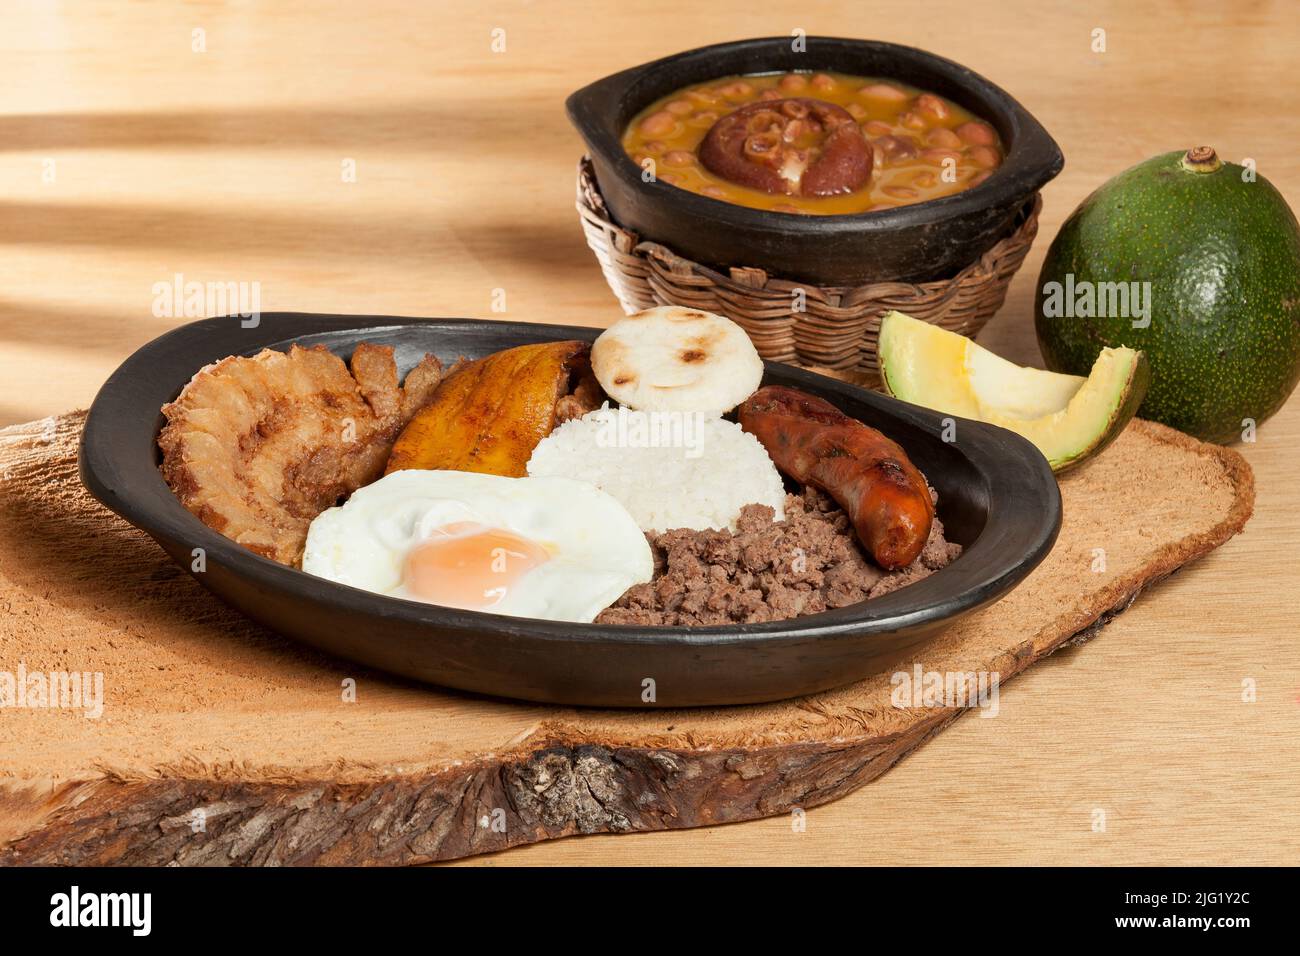 Bandeja paisa, a typical dish in the Antioqueña region of Colombia. Stock Photo